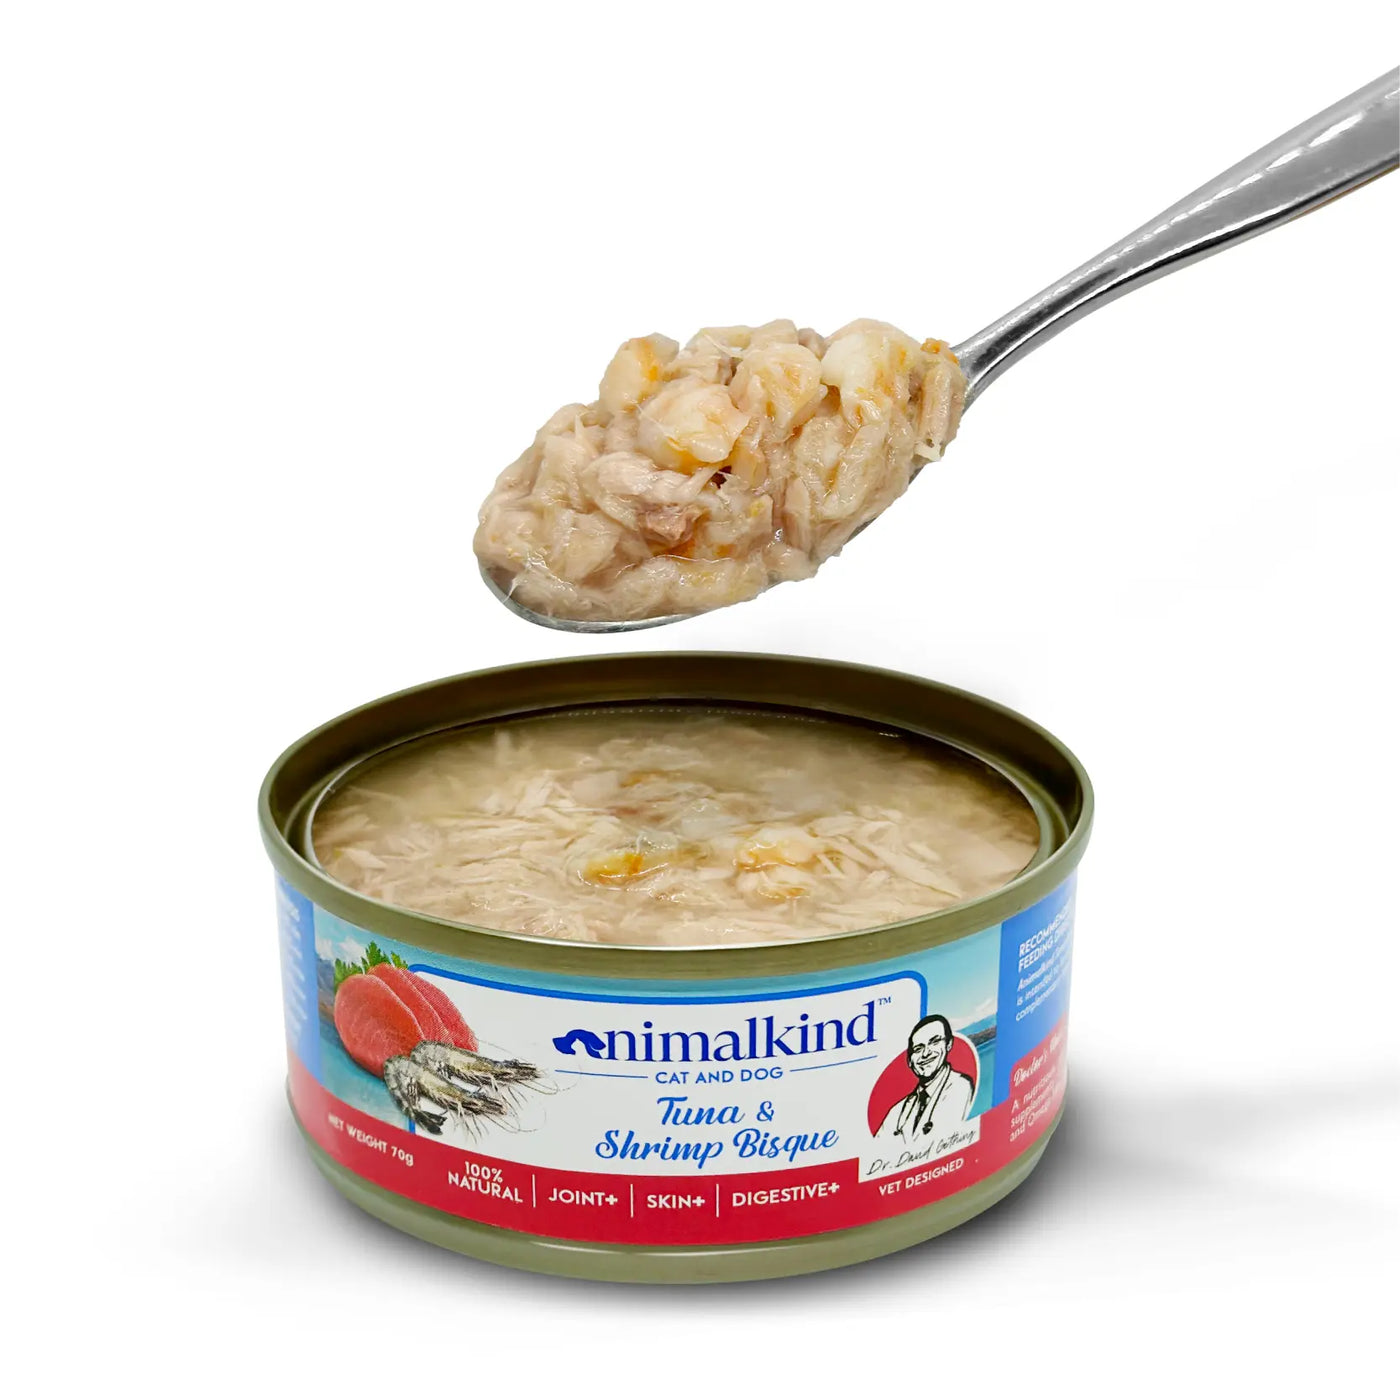 Animalkind Tuna & Shrimp Bisque Cans for Cats & Dogs